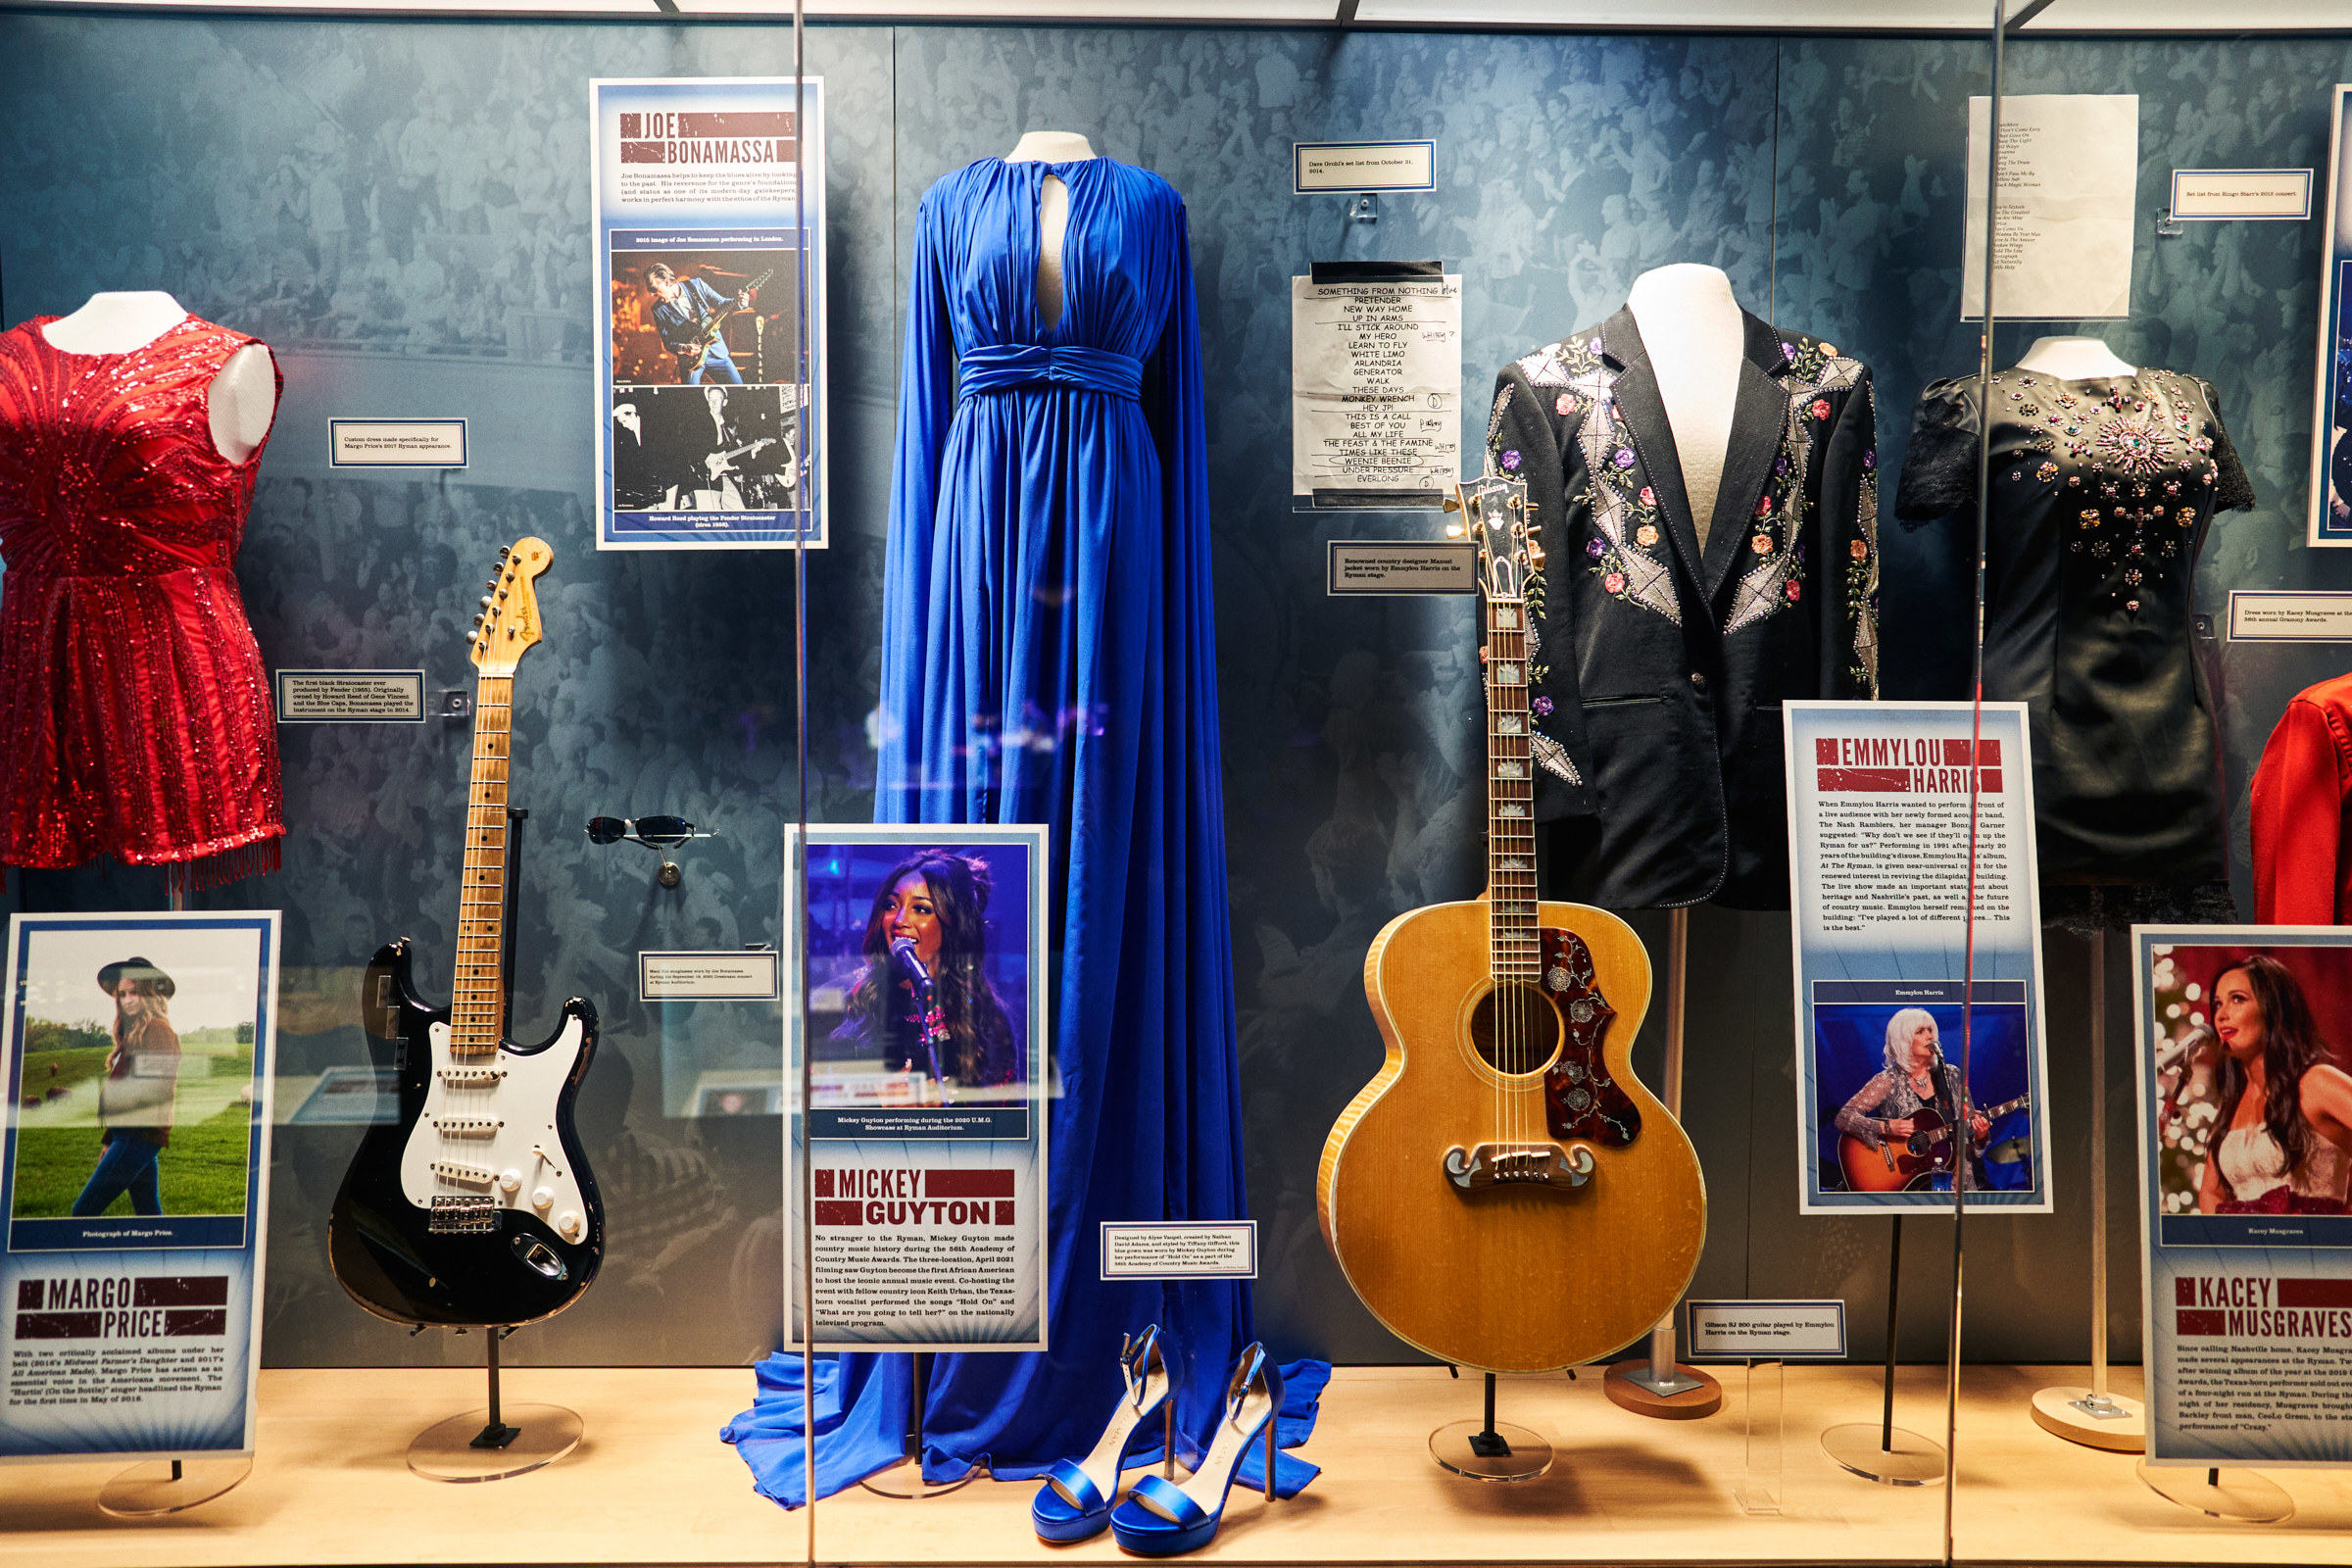 A dress is on display behind glass, between guitars and other outfits worn by artists who performed at the venue